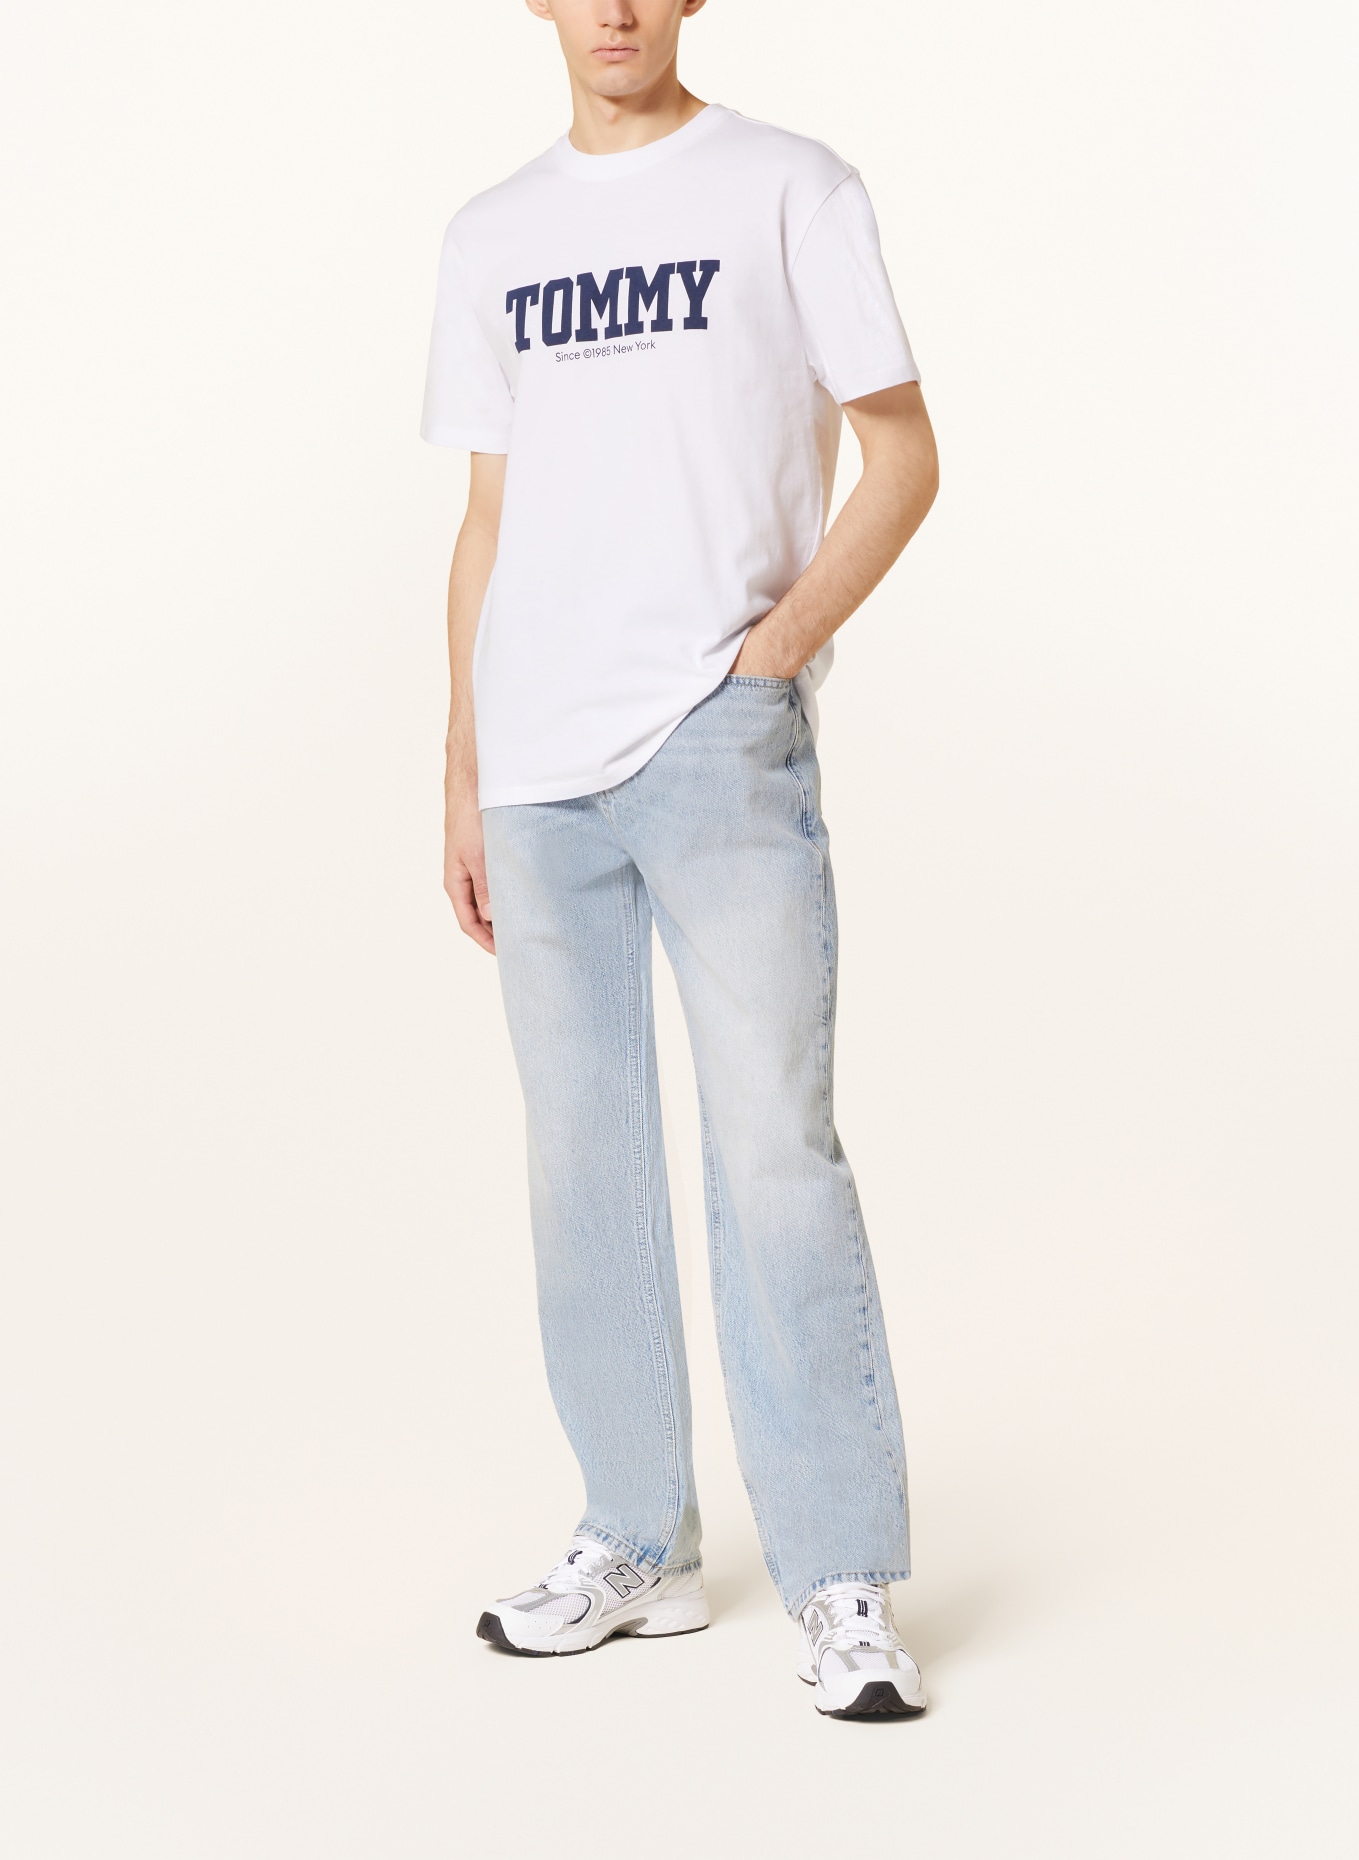 TOMMY JEANS T-Shirt, Farbe: WEISS (Bild 2)